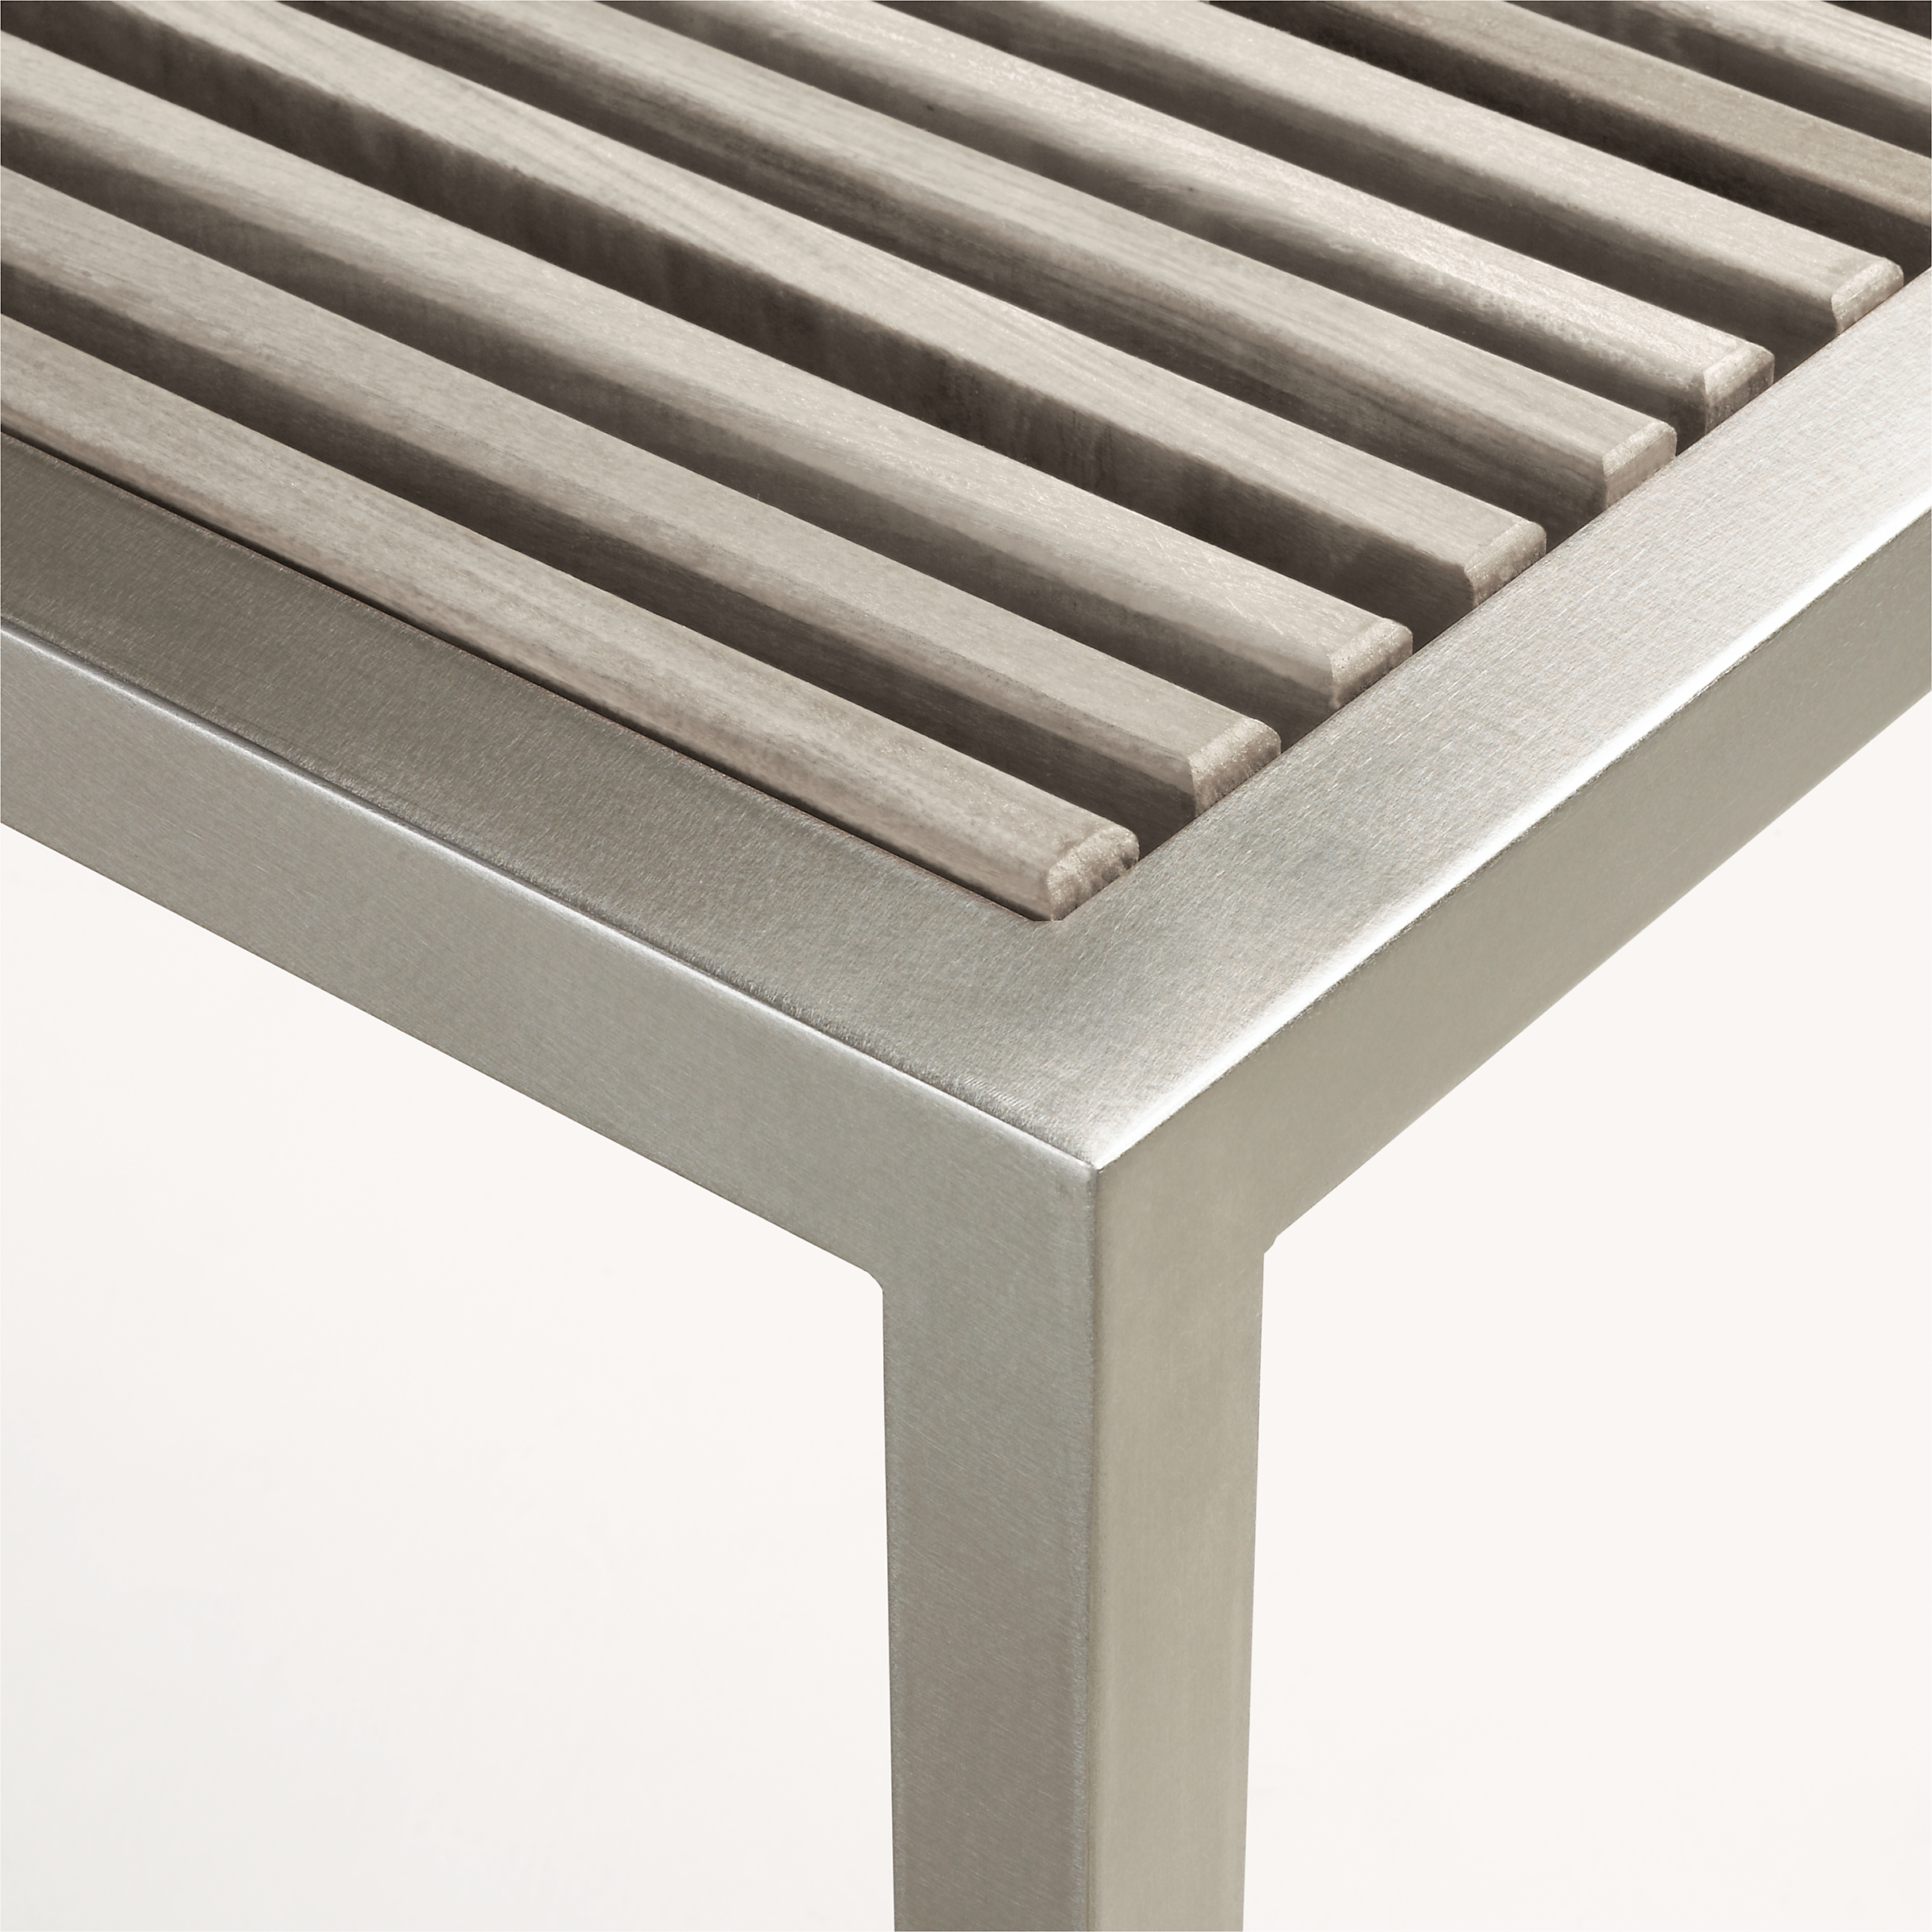 corner detail of Montego 54-wide Bench in aged Reclaimed Ash and stainless steel frame.